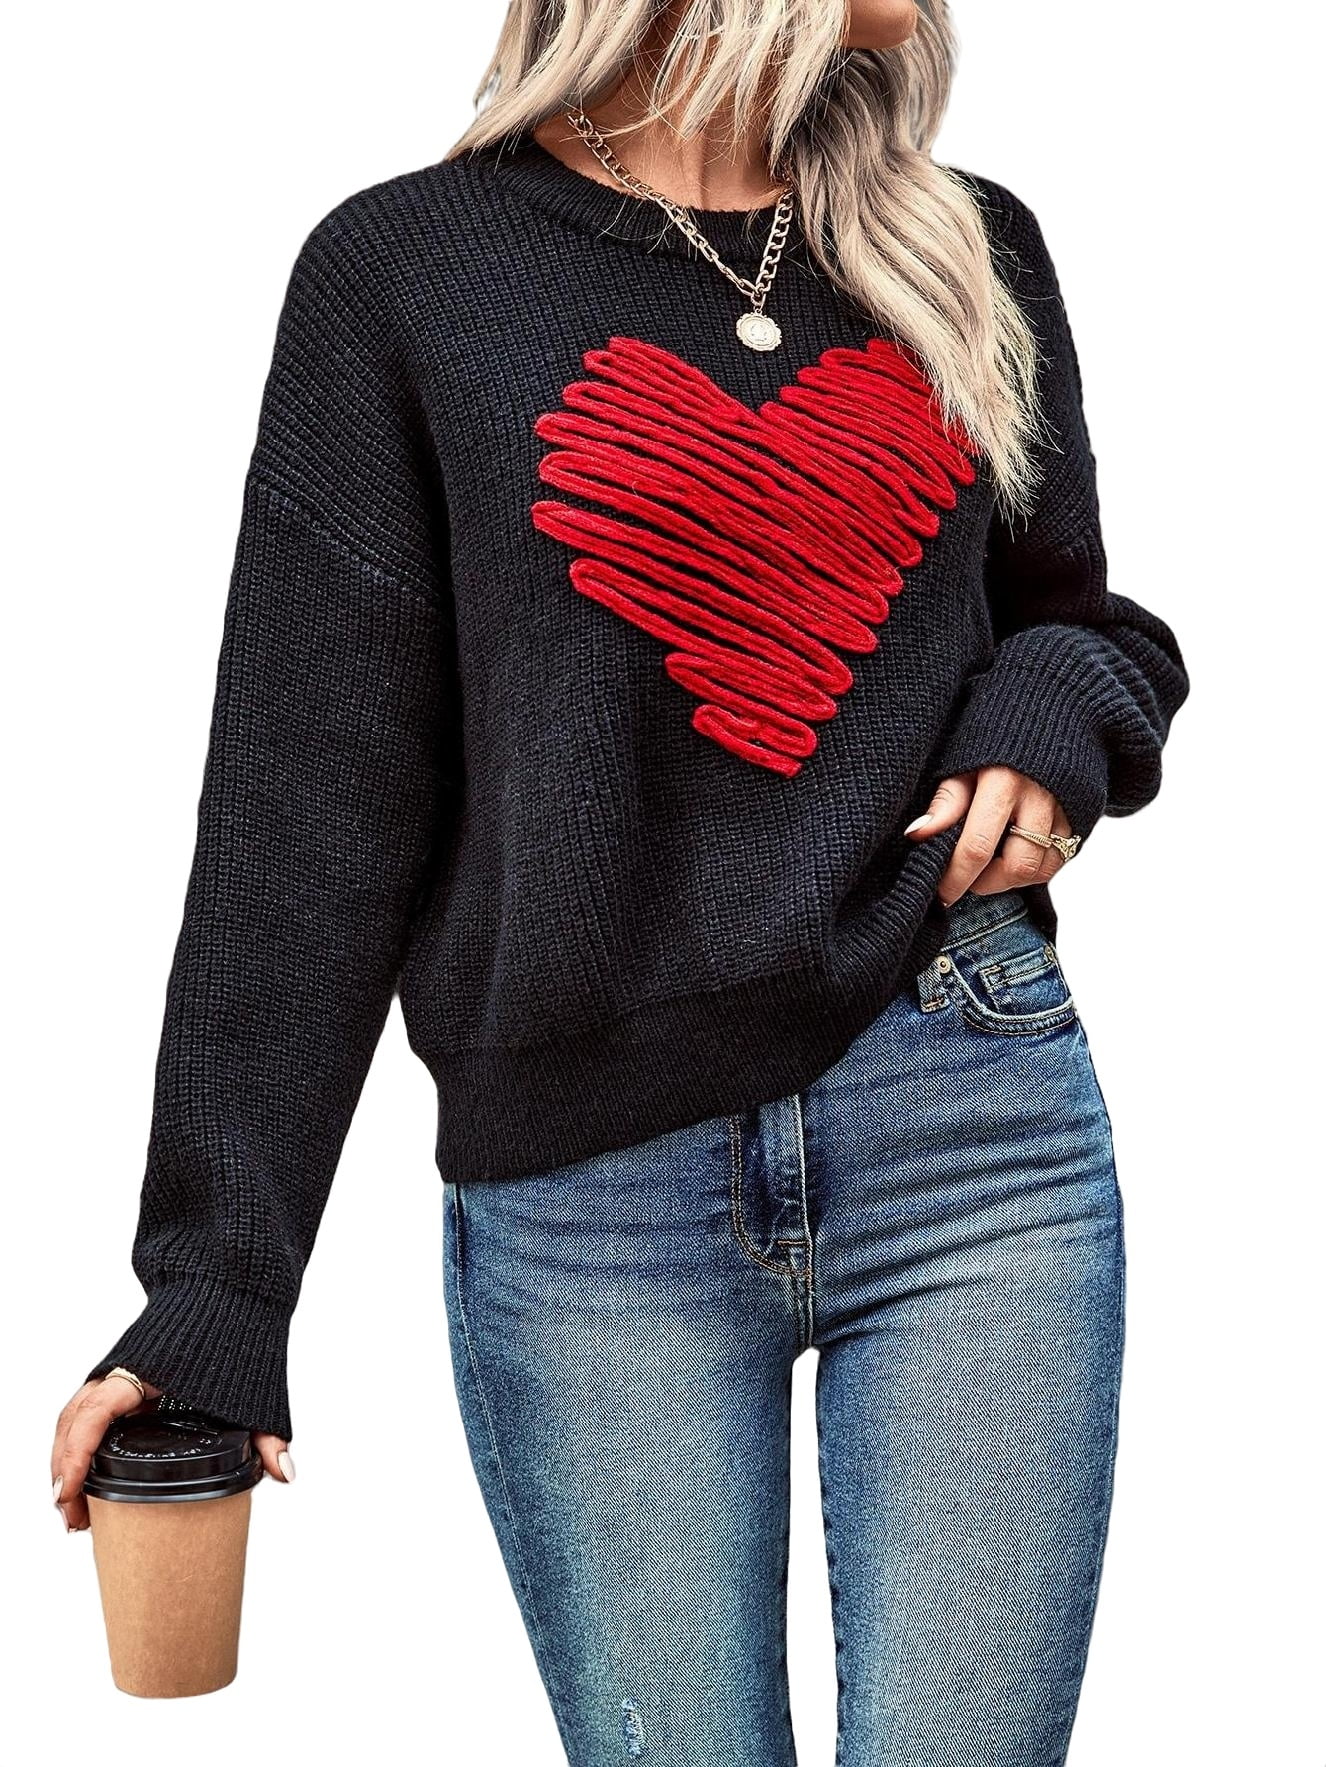 Casual Heart Pattern Round Neck Pullovers Long Sleeve Black Women's ...